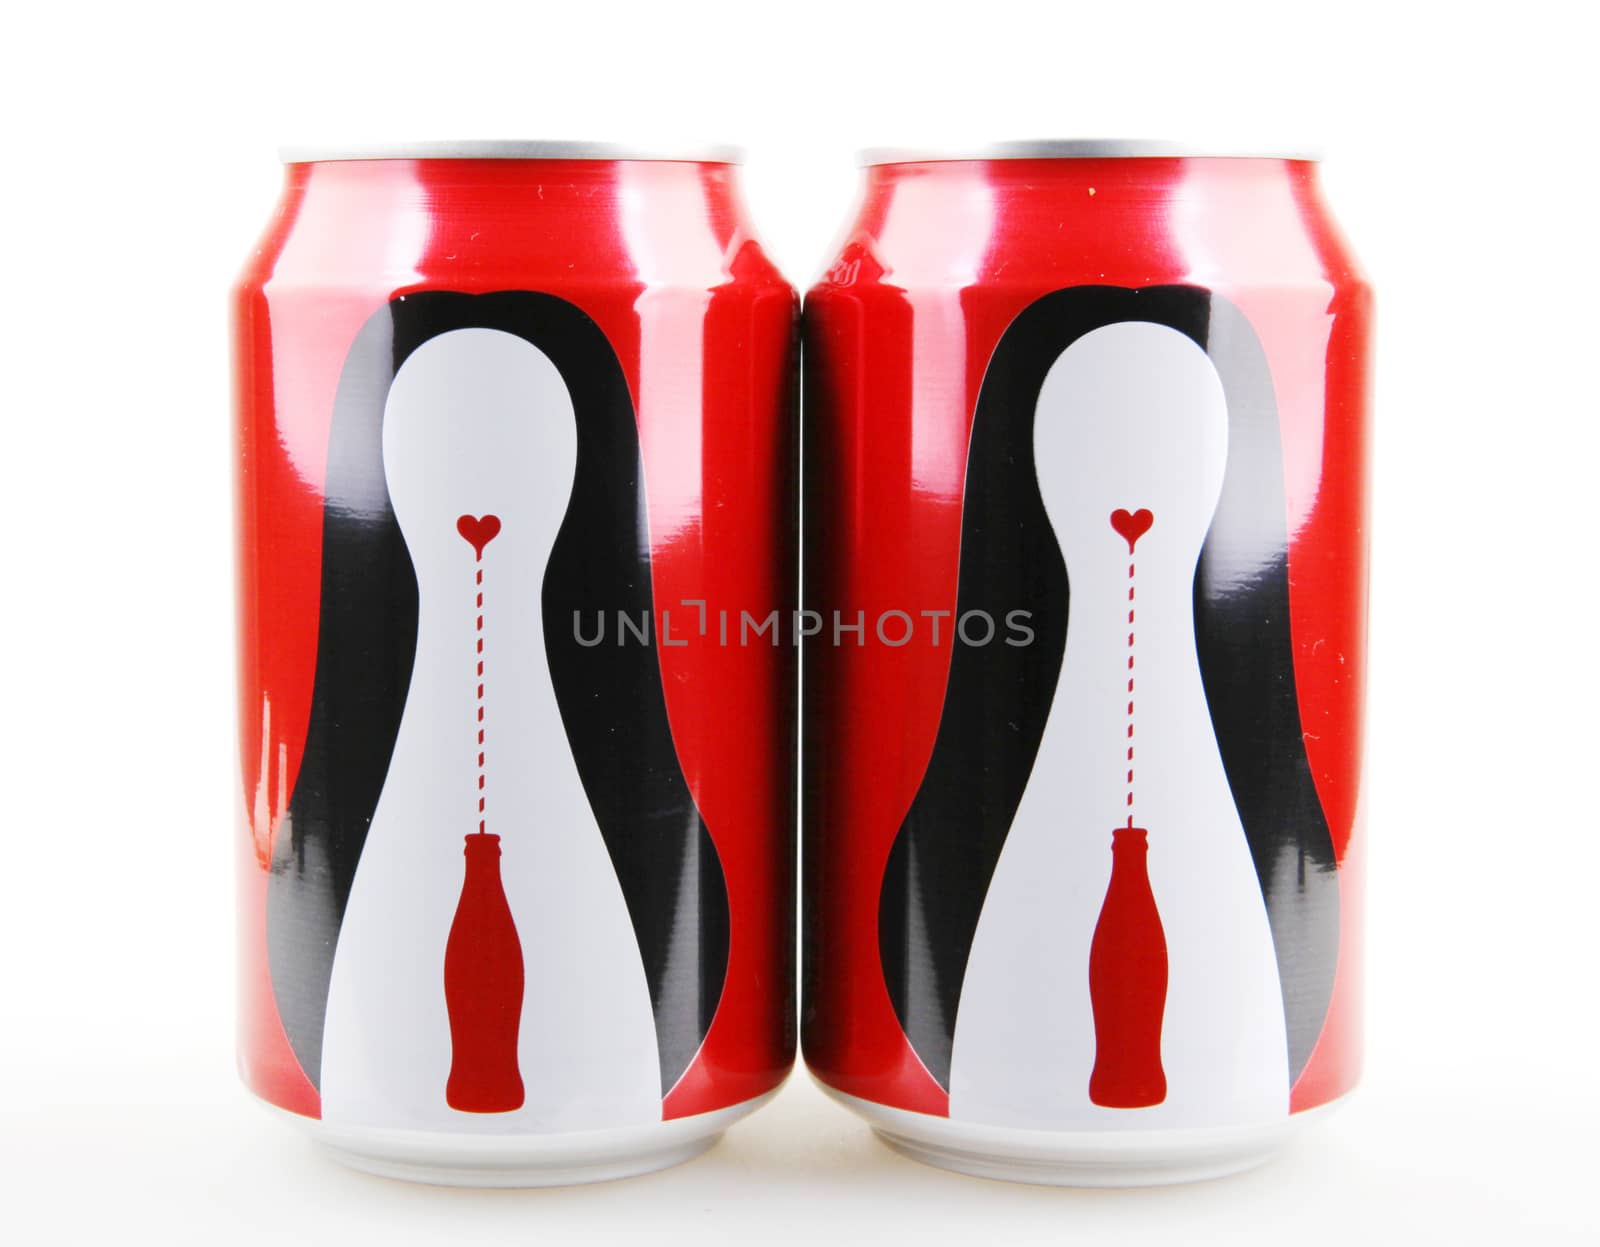 AYTOS, BULGARIA - OCTOBER 04, 2015: Coca-Cola isolated on white background. Coca-Cola is a carbonated soft drink sold in stores, restaurants, and vending machines throughout the world.